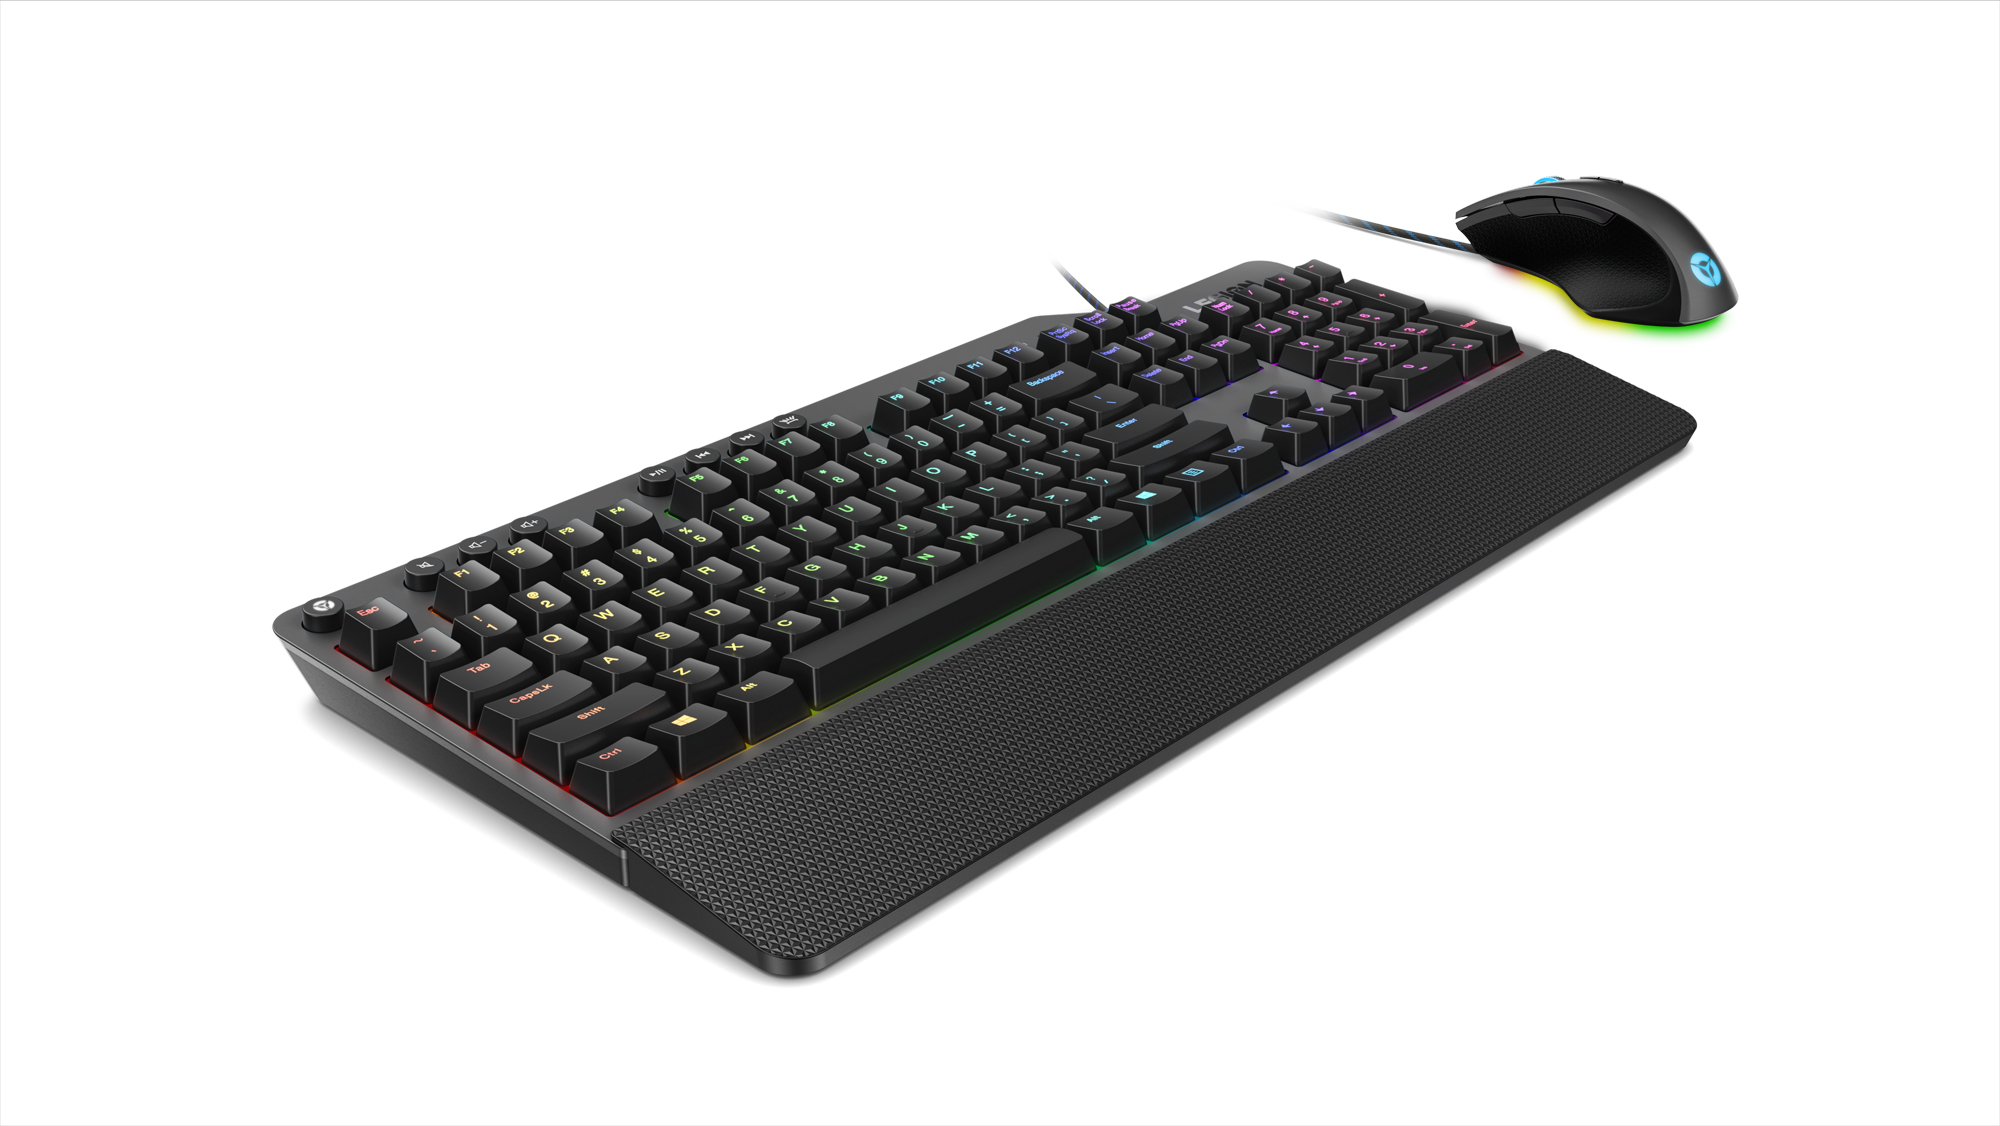 lenovo announce new legion gaming peripherals ces 2019 14 k500 with m500